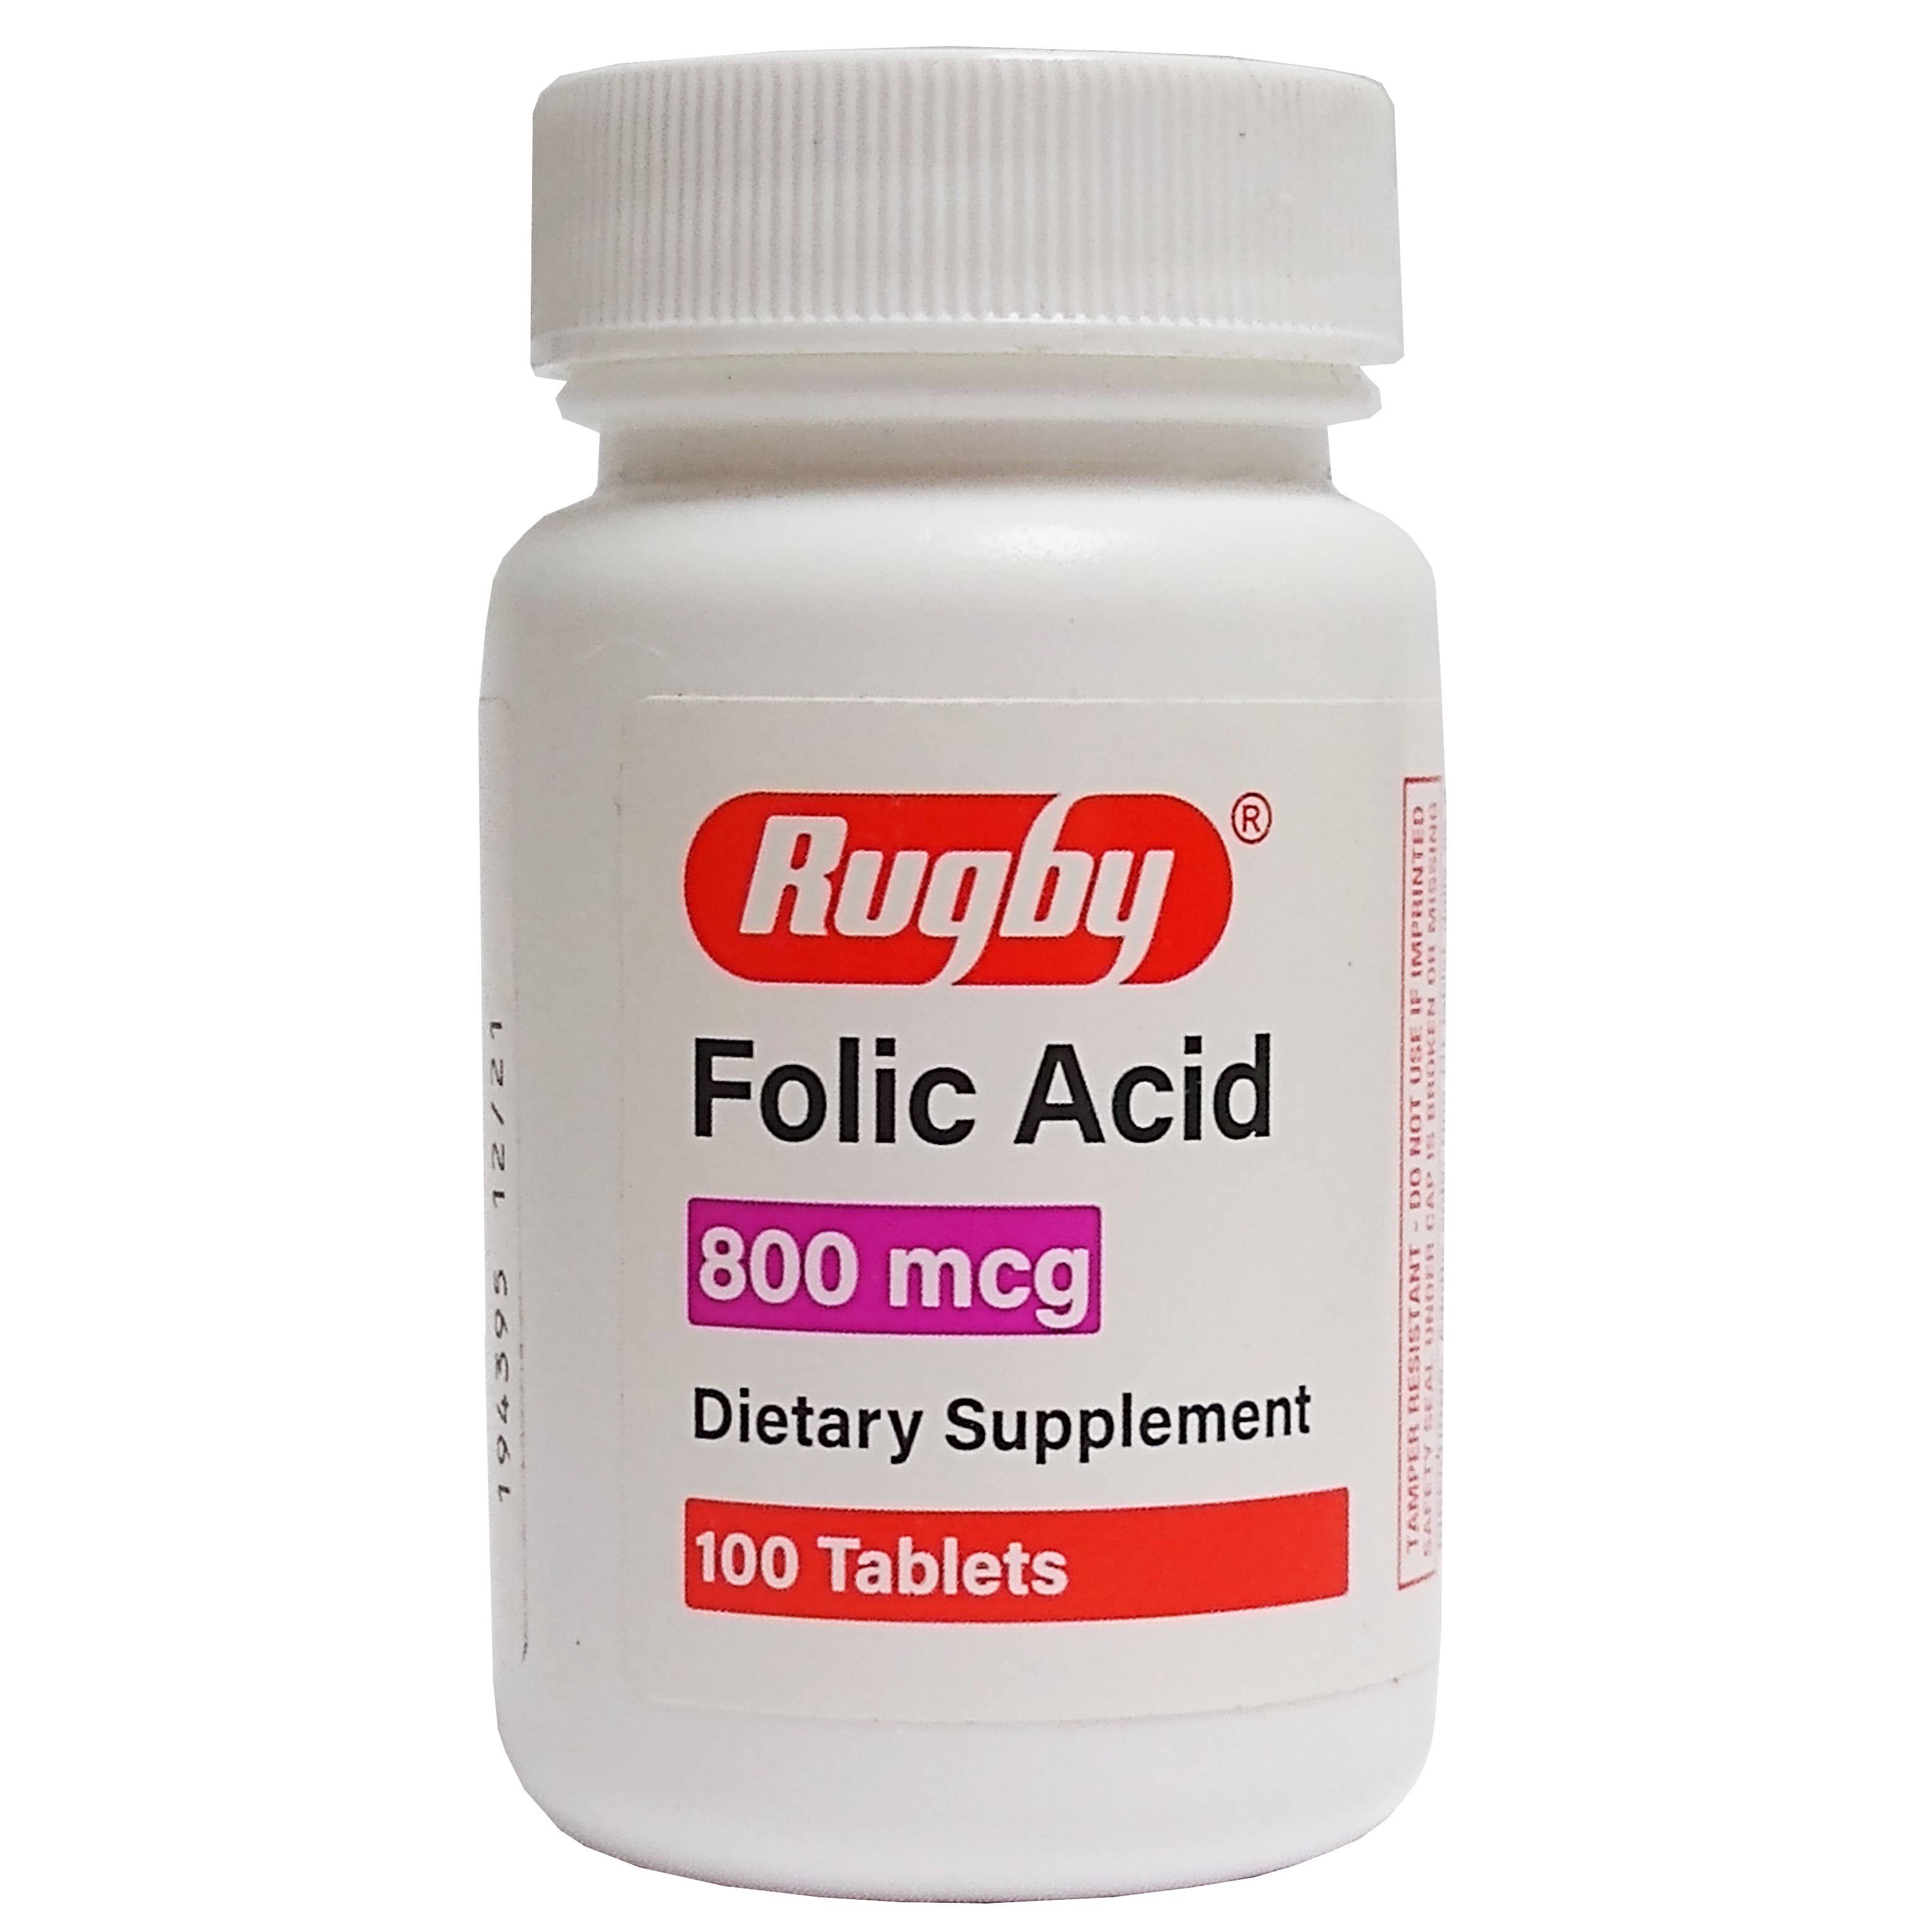 Folic Acid 800 mcg 100 Tablets by Rugby (1 Pack)